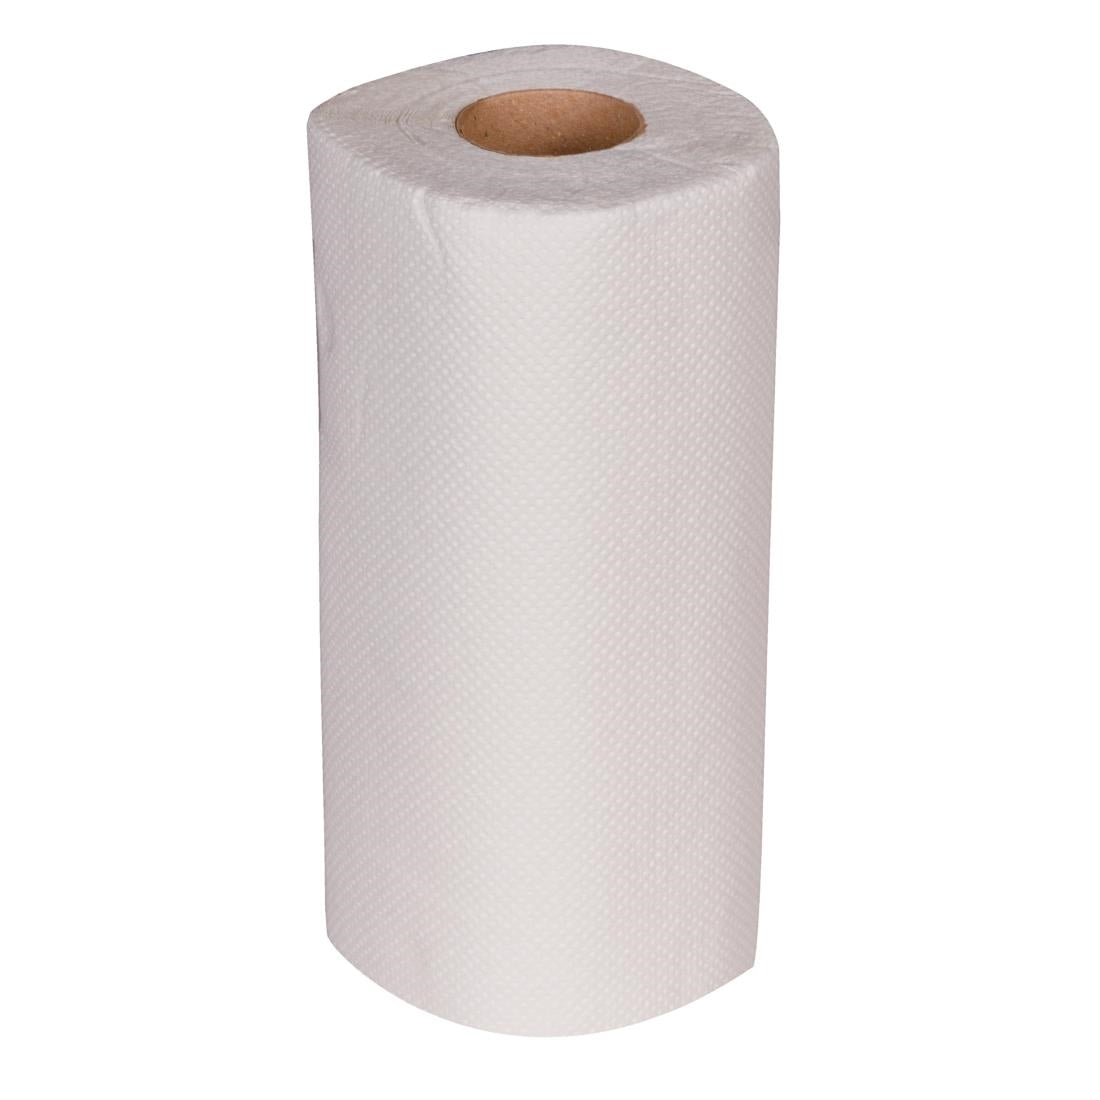 GH065 Jantex Kitchen Rolls White 2-Ply 11.5m (Pack of 24) JD Catering Equipment Solutions Ltd